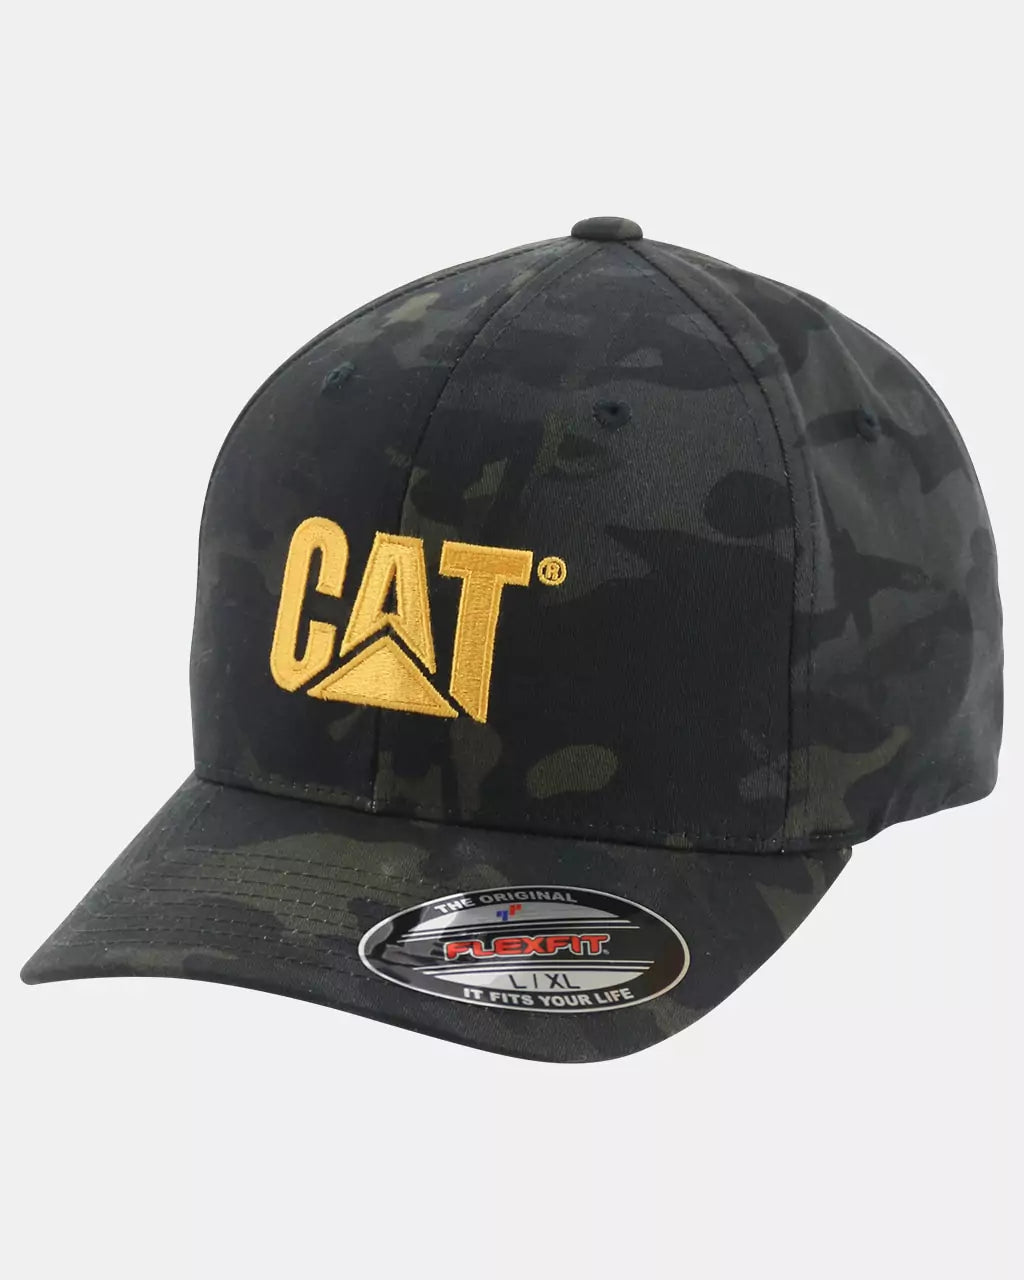 Caterpillar Digital Camo Hat - Brand New with Tags